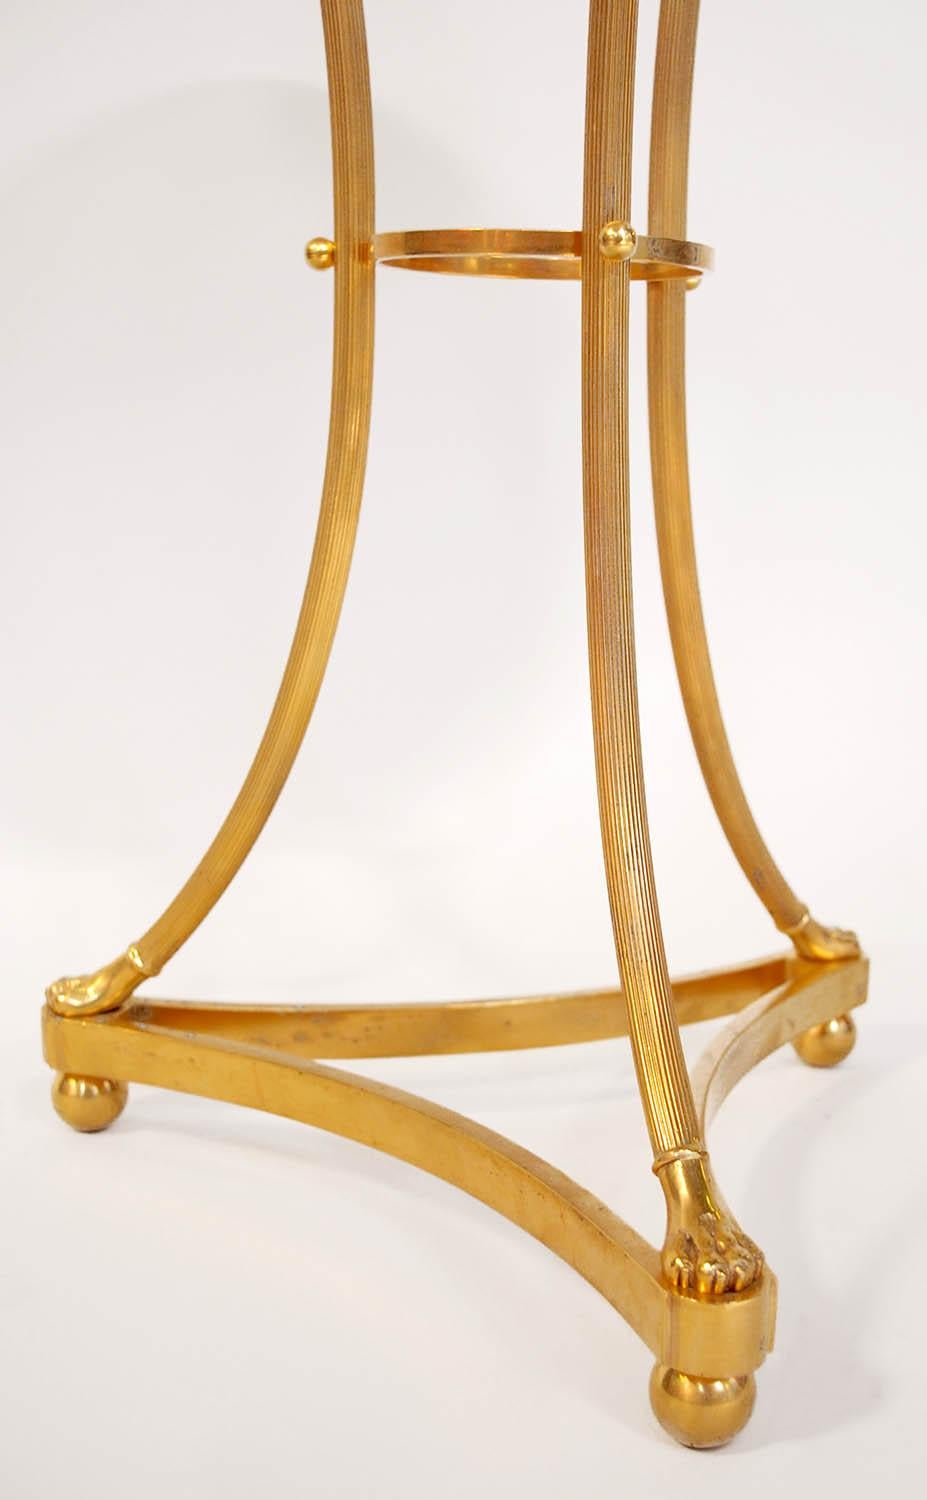 French Directoire Style Athenienne Stand in Gilt Bronze and Porcelain, 1900 Period For Sale